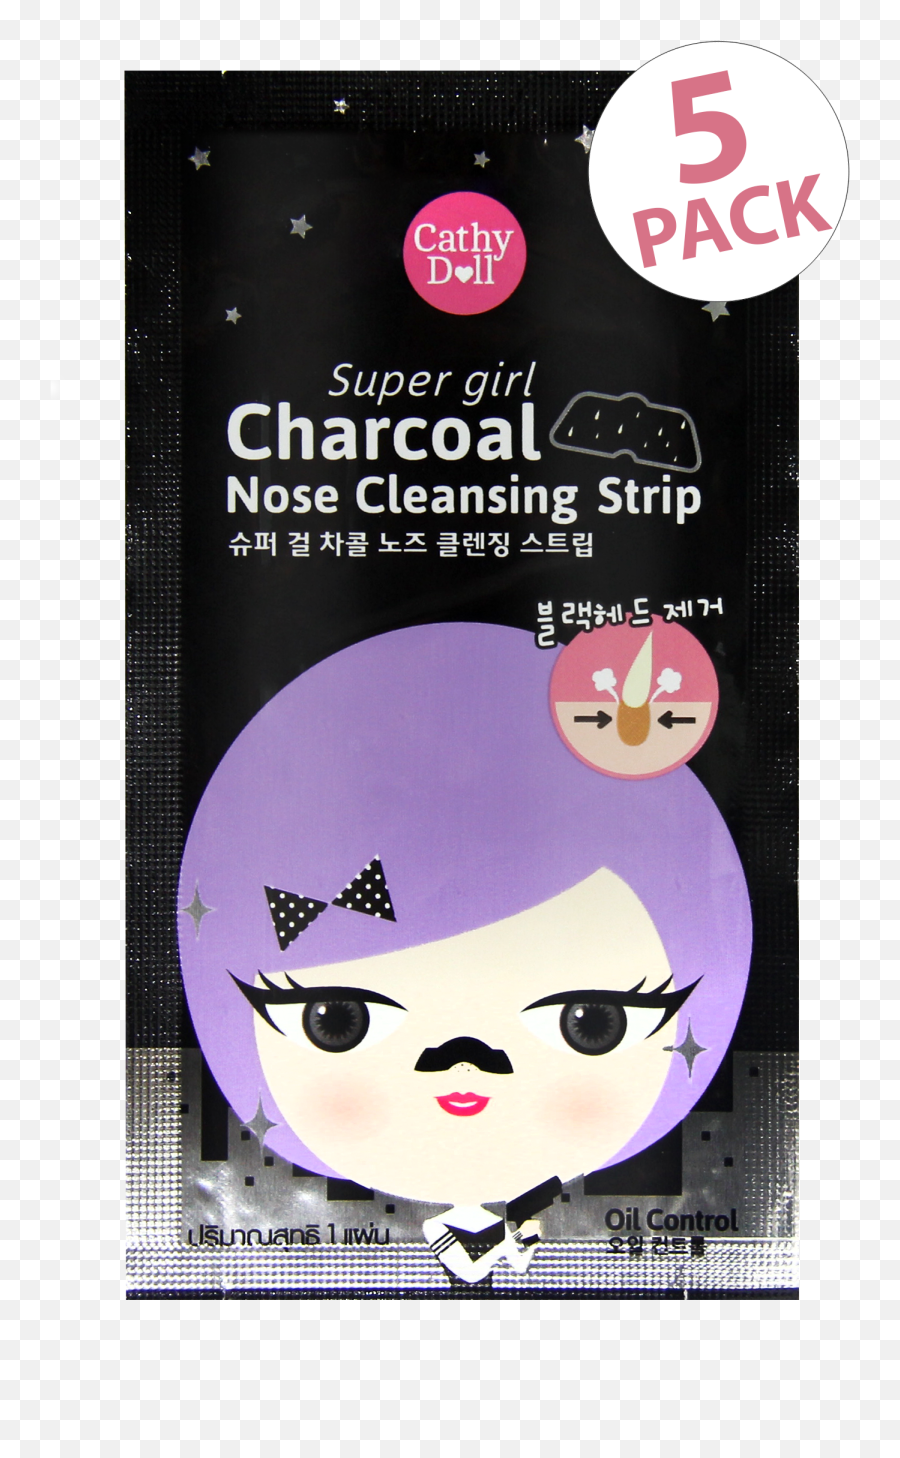 Super Girl Charcoal Nose Cleansing Strip - Charcoal Nose Cleansing Strip Png,Super Girl Png